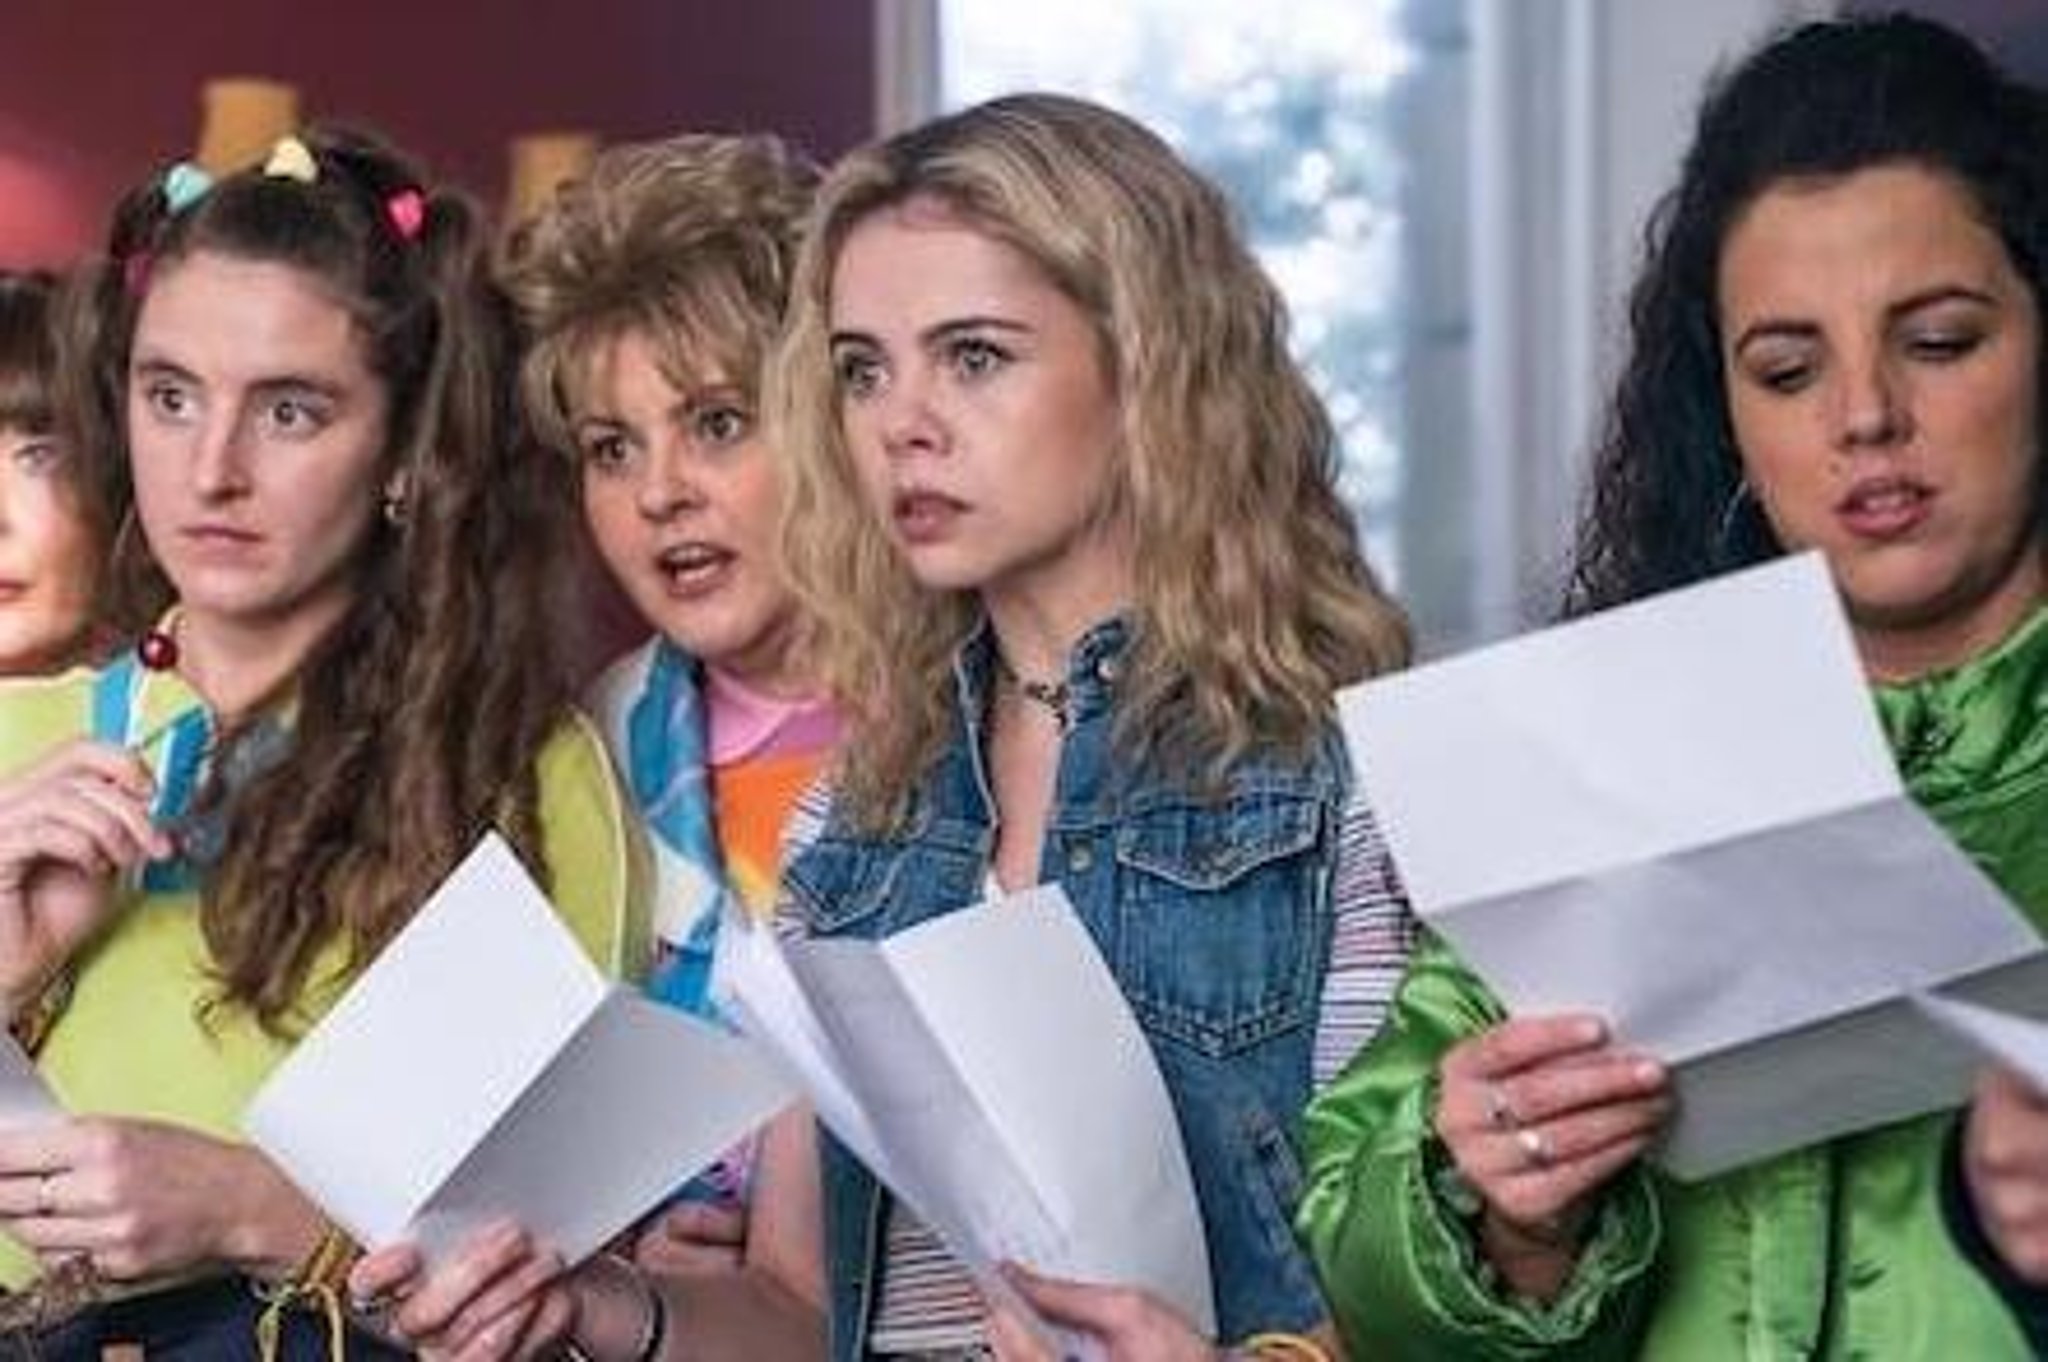 Derry Girls: How many people watched the show this week? - And how did they react?